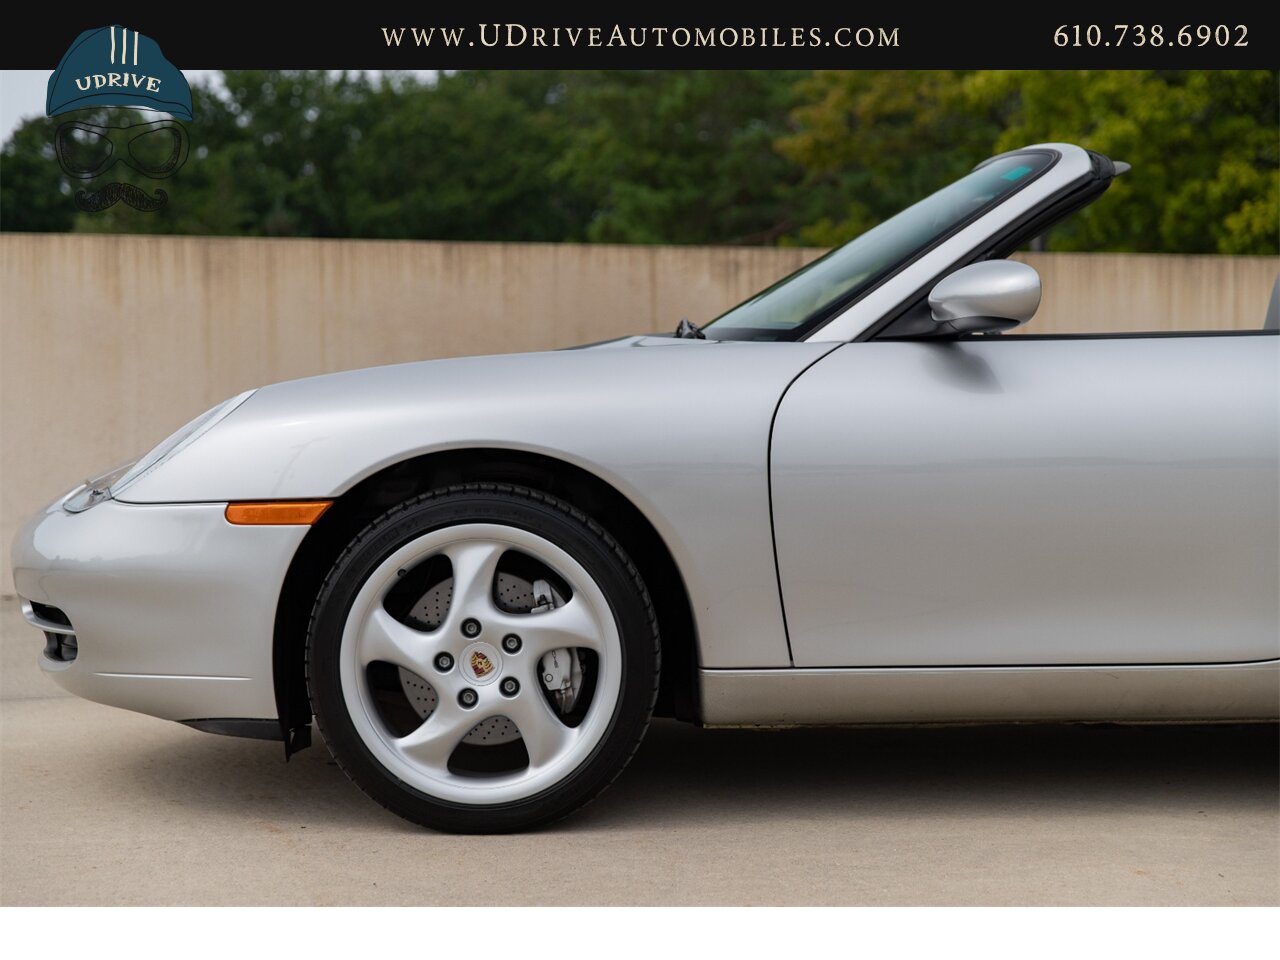 2001 Porsche 911 Carrera 4 Cabriolet Tiptronic IMS Upgrade  Power Seats 18in Turbo Look Wheels 2 Owners $5k Recent Service - Photo 11 - West Chester, PA 19382